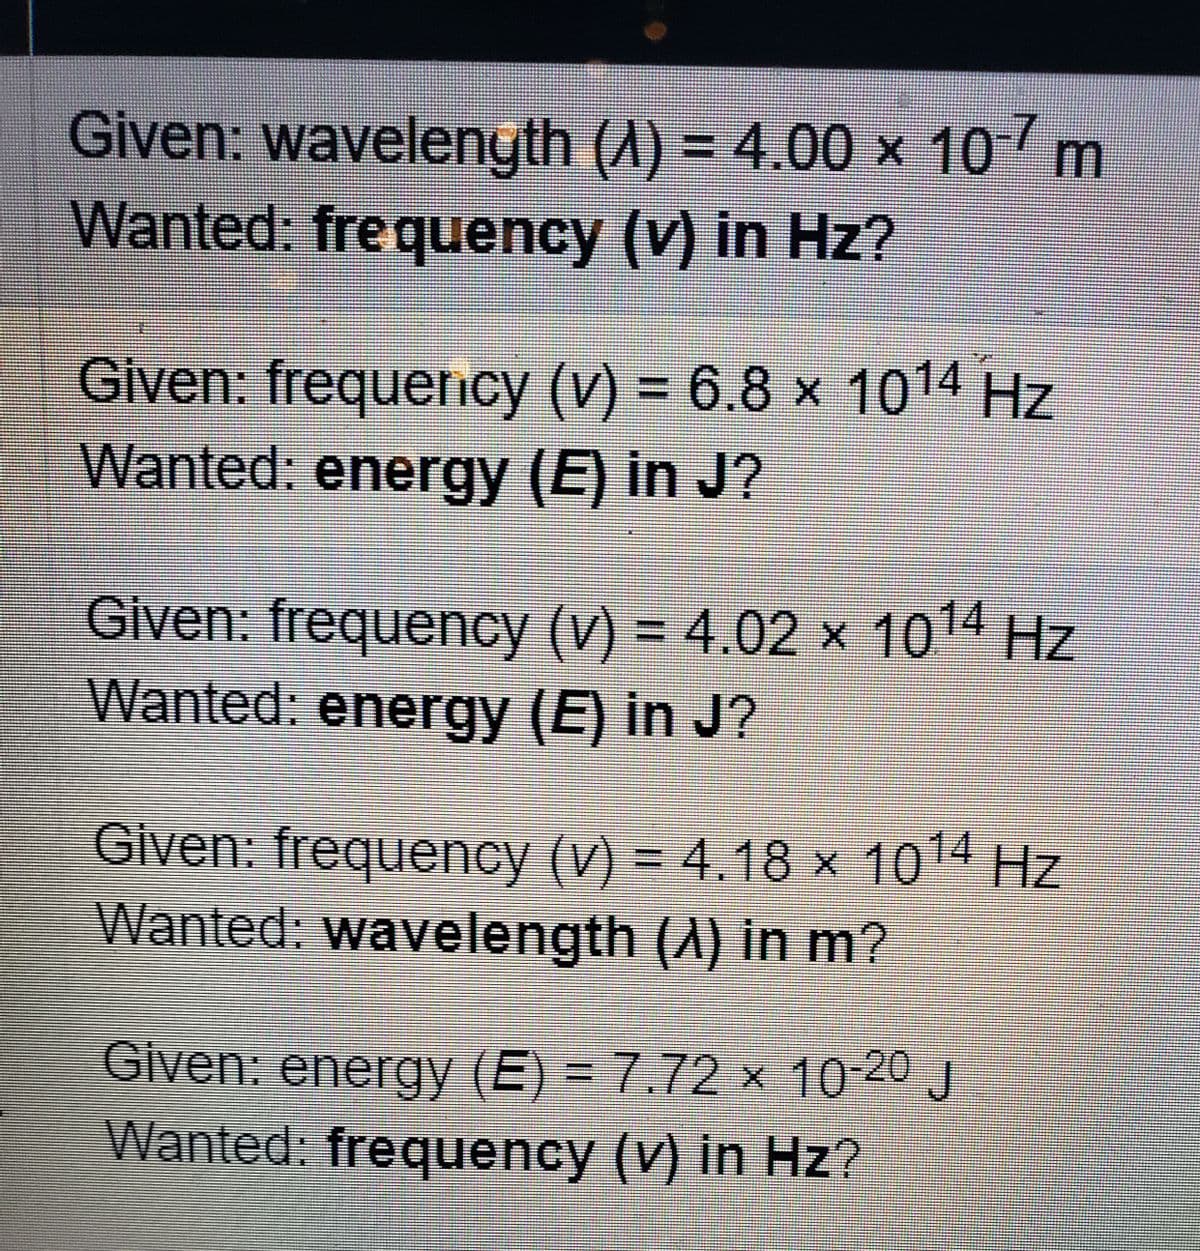 Given: wavelength (A) = 4.00 × 10-7 m
Wanted: frequency (v) in Hz?
Given: frequency (v) = 6.8 × 1014 Hz
Wanted: energy (E) in J?
Given: frequency (v) = 4.02 × 10¹4 Hz
Wanted: energy (E) in J?
Given: frequency (v) = 4.18 × 1014 Hz
Wanted: wavelength (À) in m?
Given: energy (E) = 7.72 × 10-20 J
Wanted: frequency (v) in Hz?